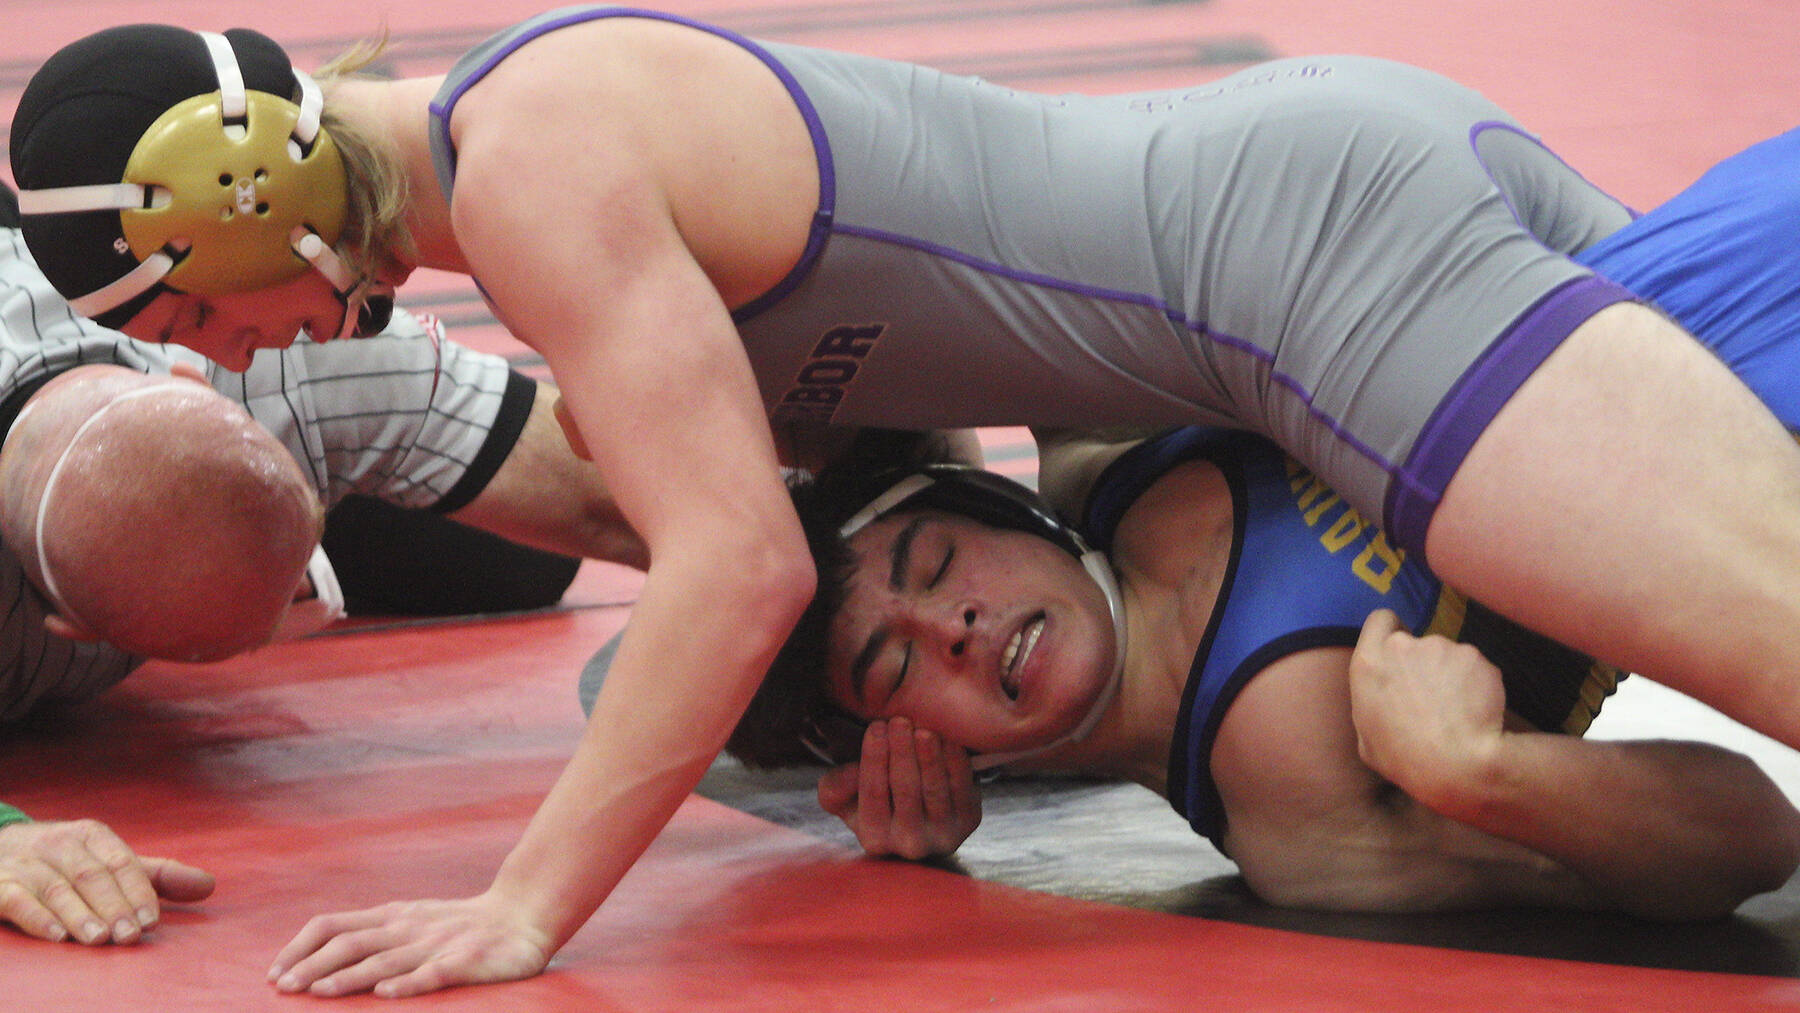 While Garrett Goade won his first-round match, he was pinned in the second round in his next match.